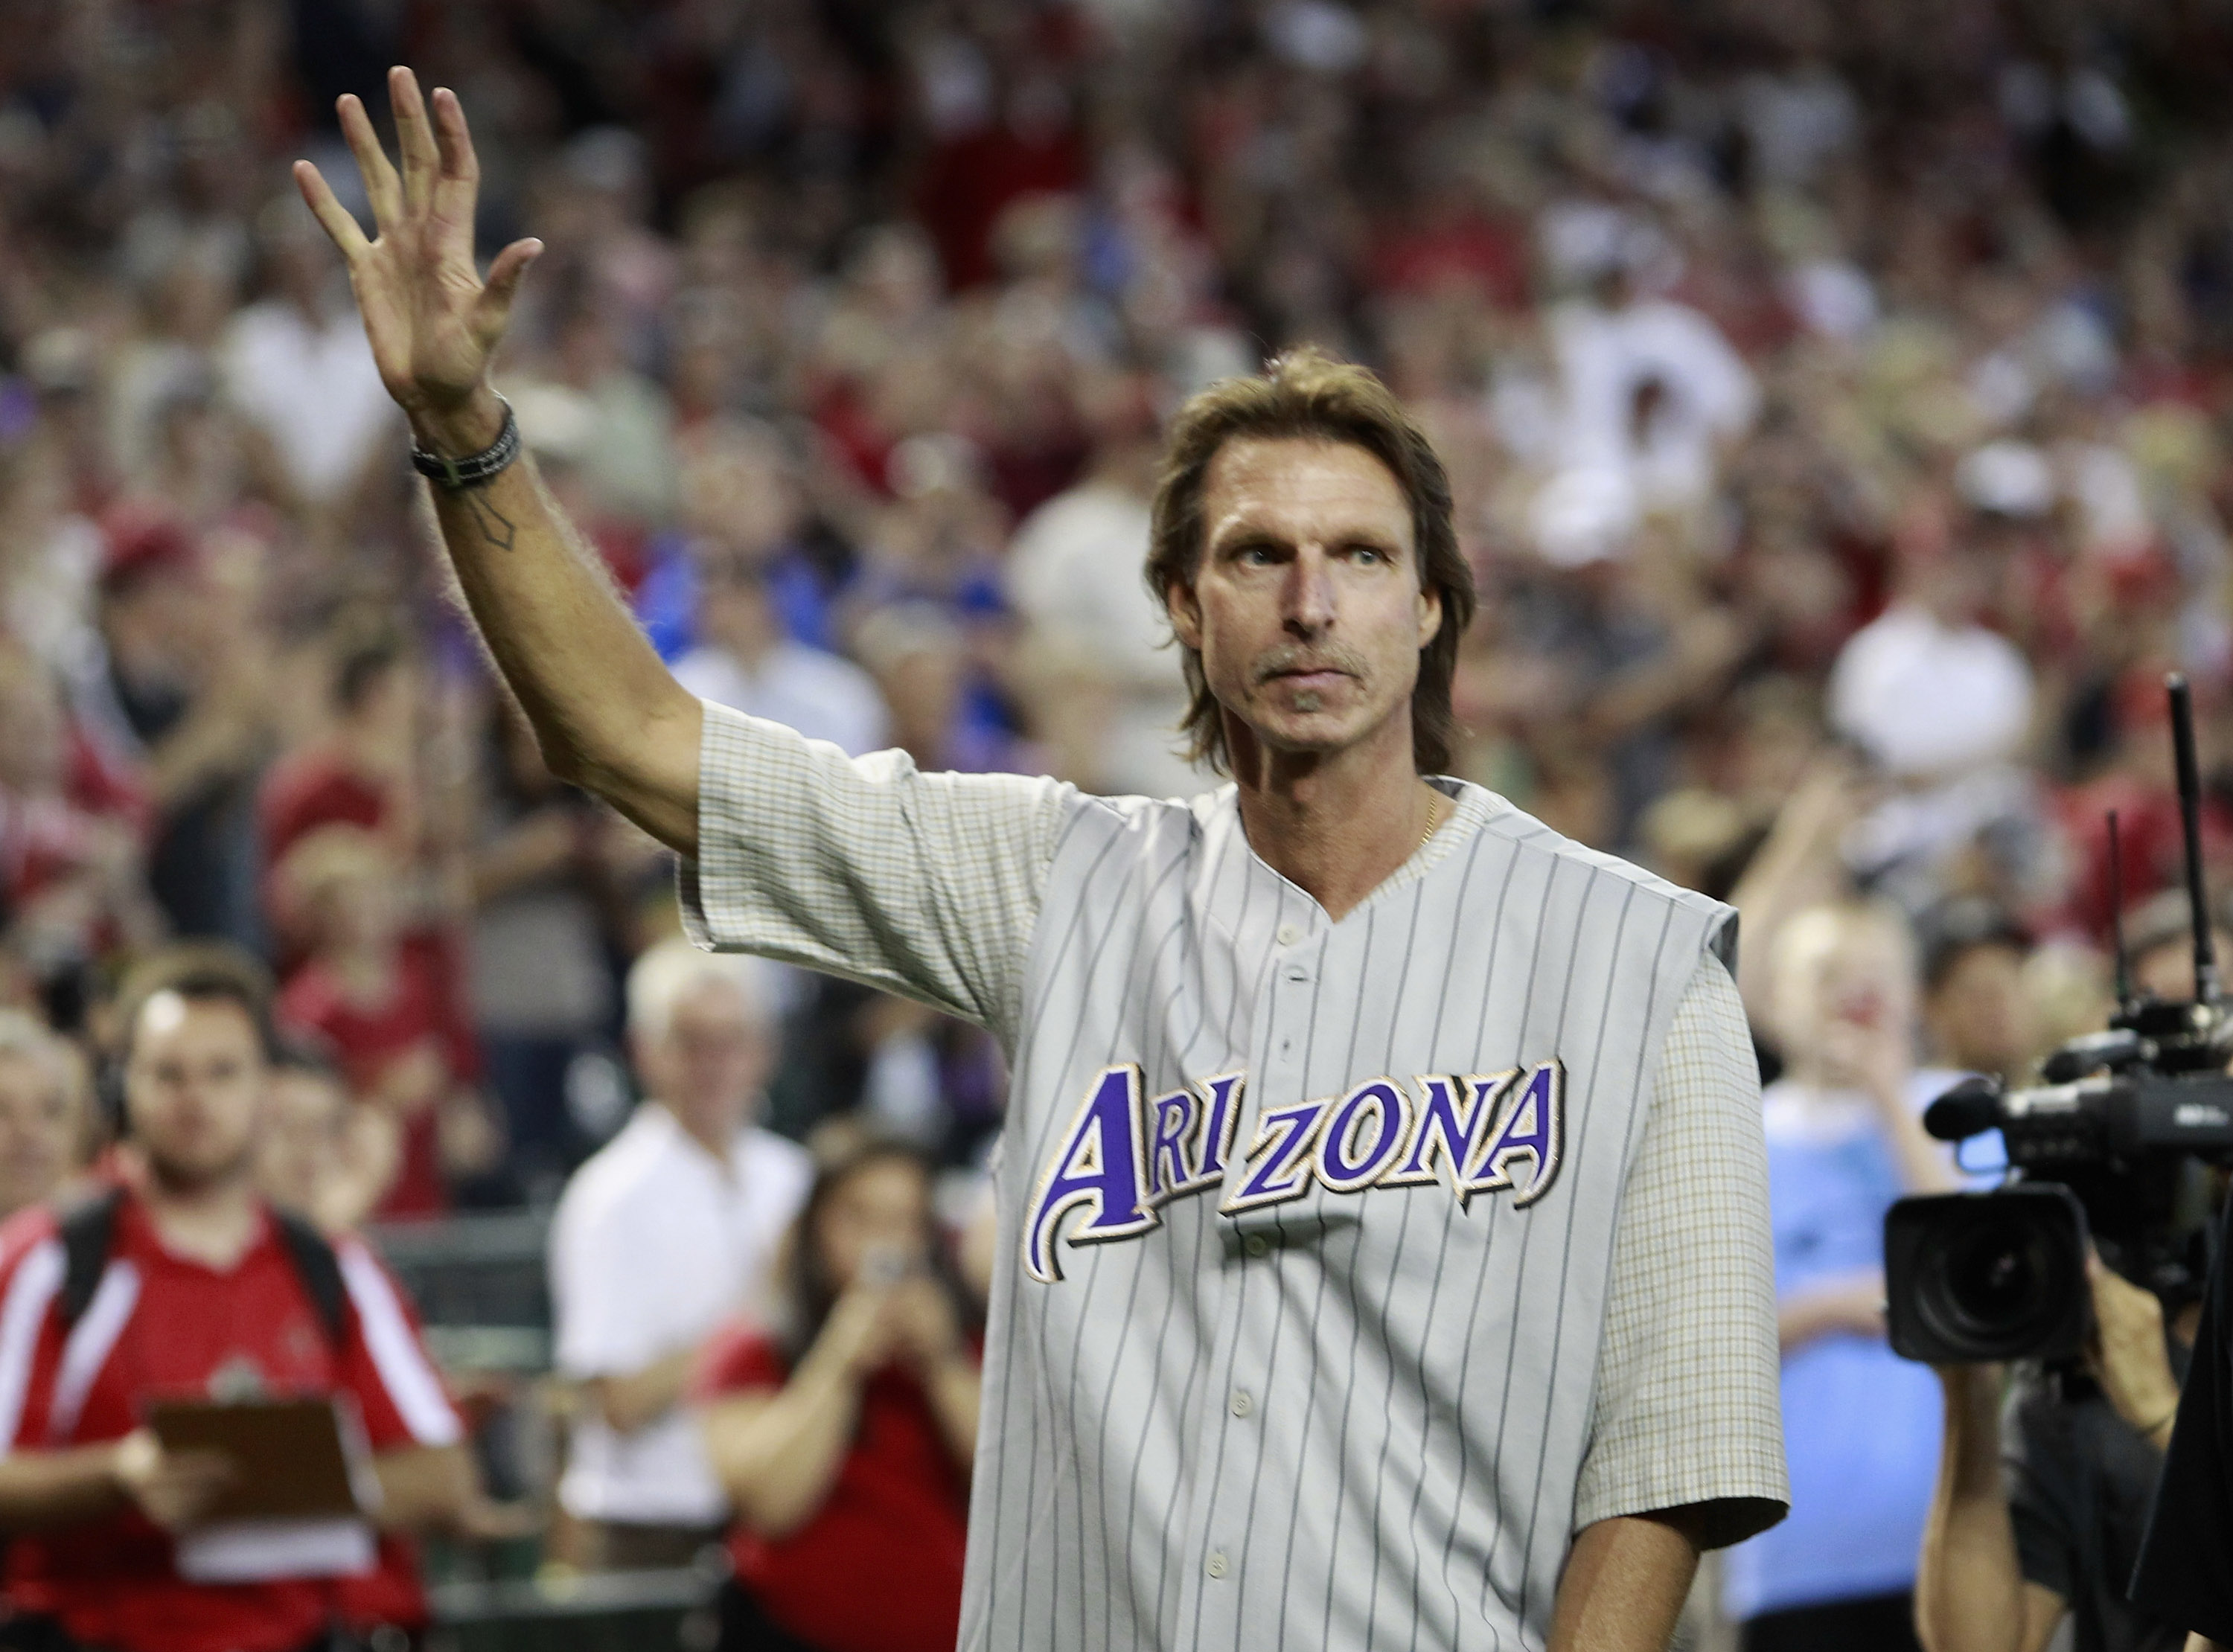 Randy Johnson's Family 5 Fast Facts You Need to Know